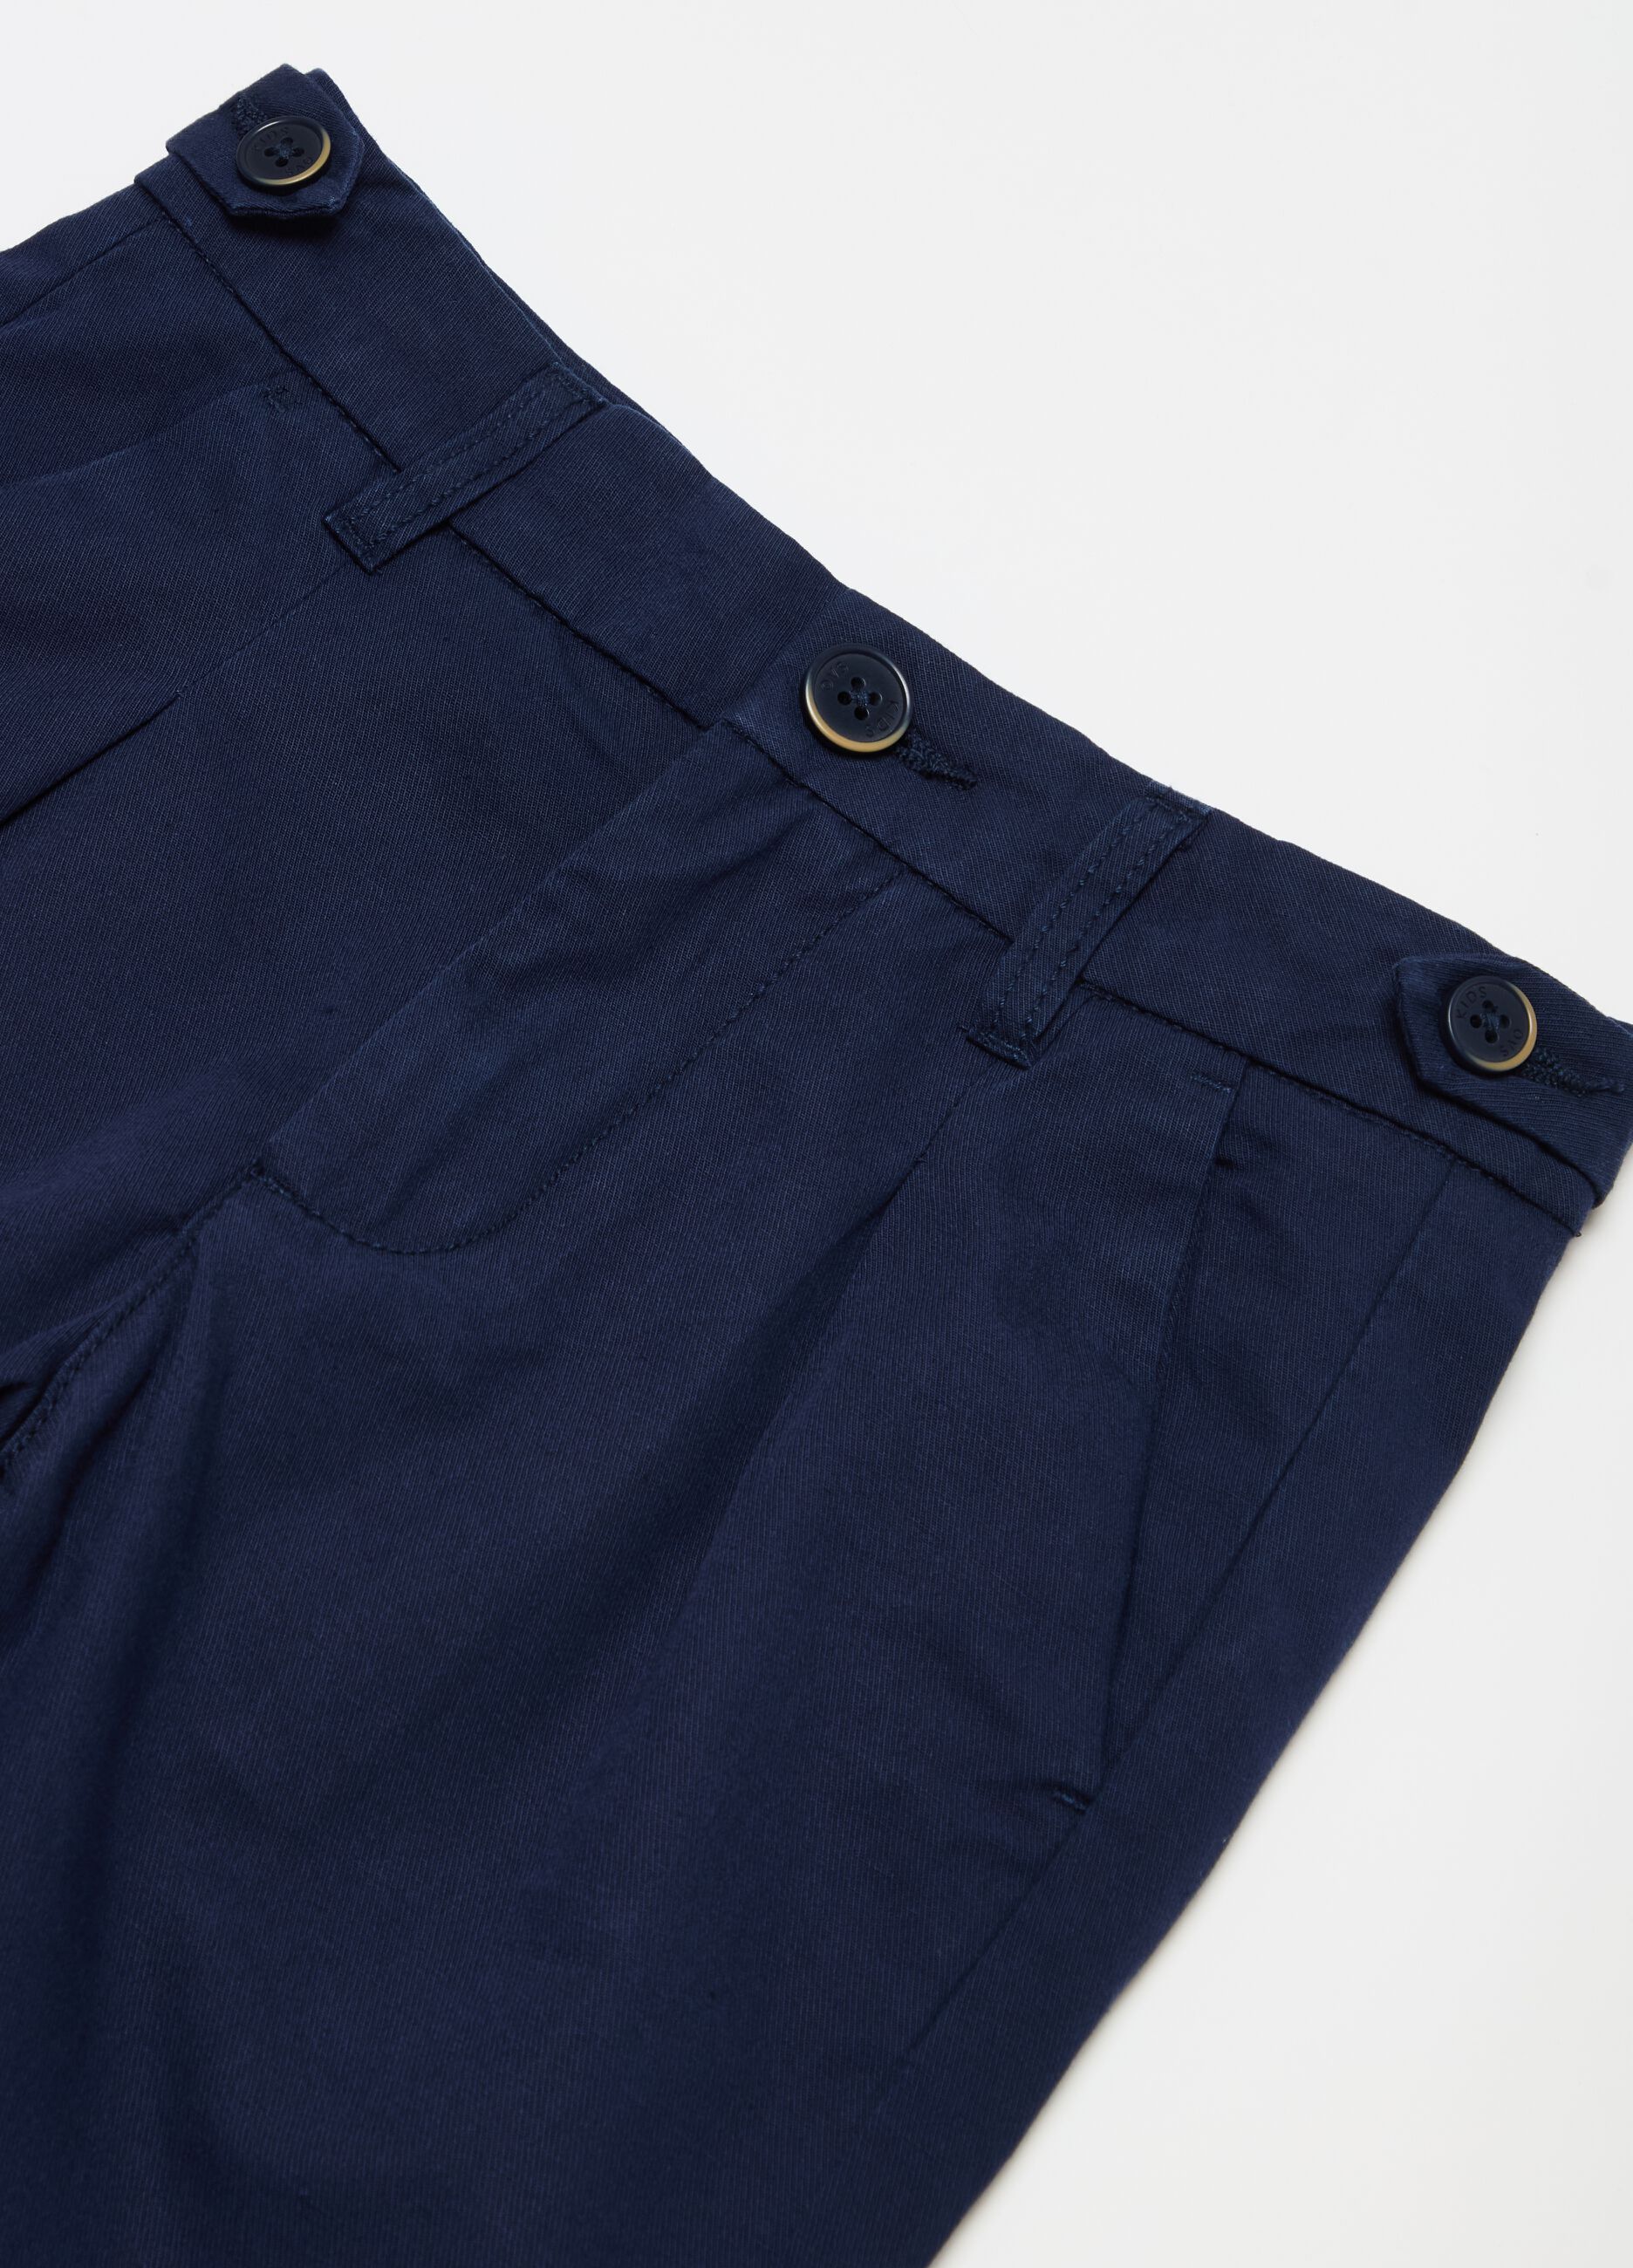 Chino Bermuda shorts in cotton and linen